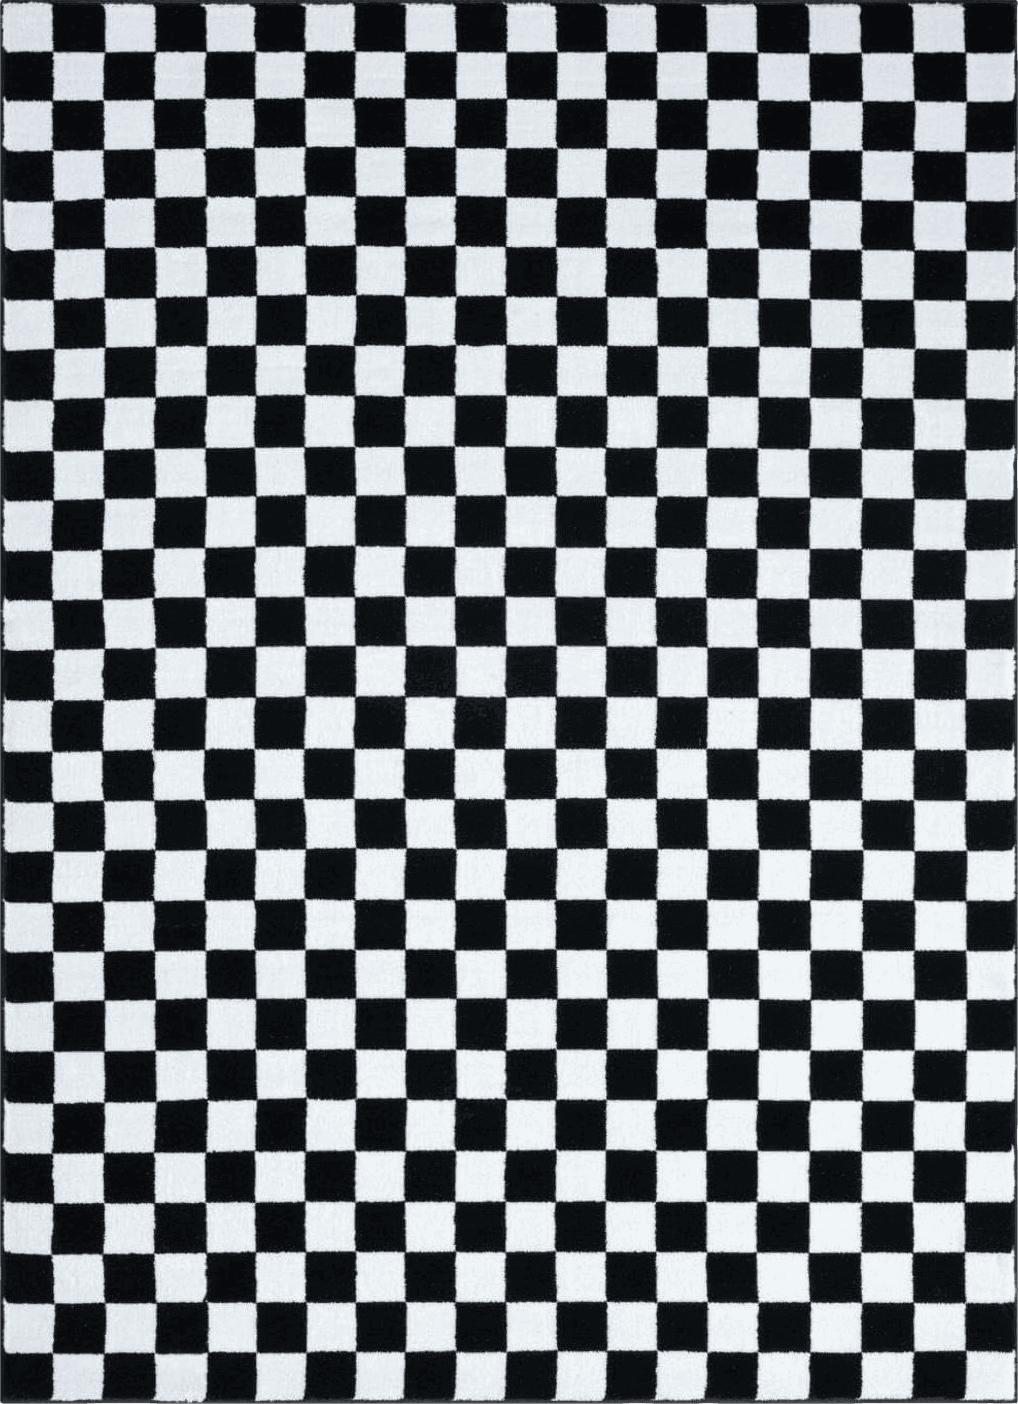 LUXE WEAVERS Geometric Checkered Black and White 5x7 Area Rug, Non-Shedding Modern Living Room Carpet